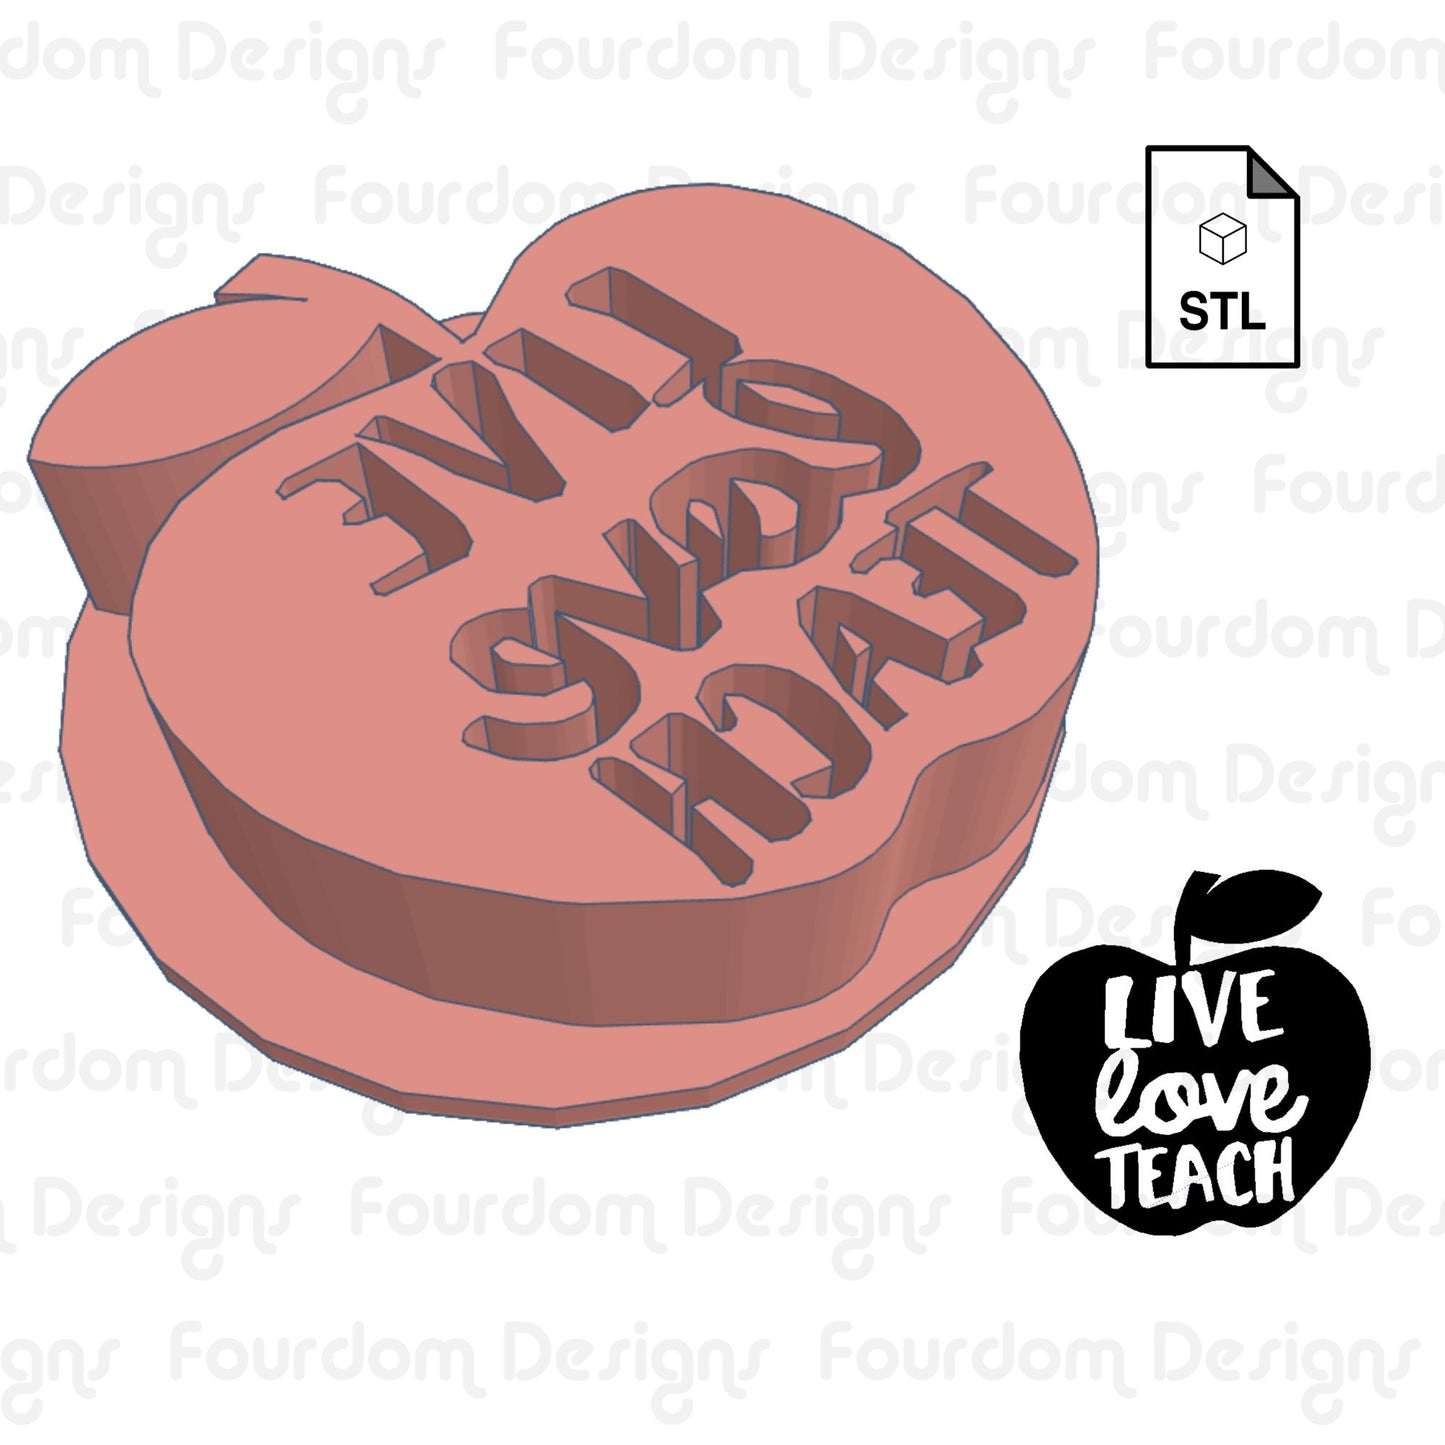 LIVE love TEACH Cookie Imprint Digital Download STL File for Cookie Cutter Fondant Cutter Clay Cutter 3D Model for 3D Printing